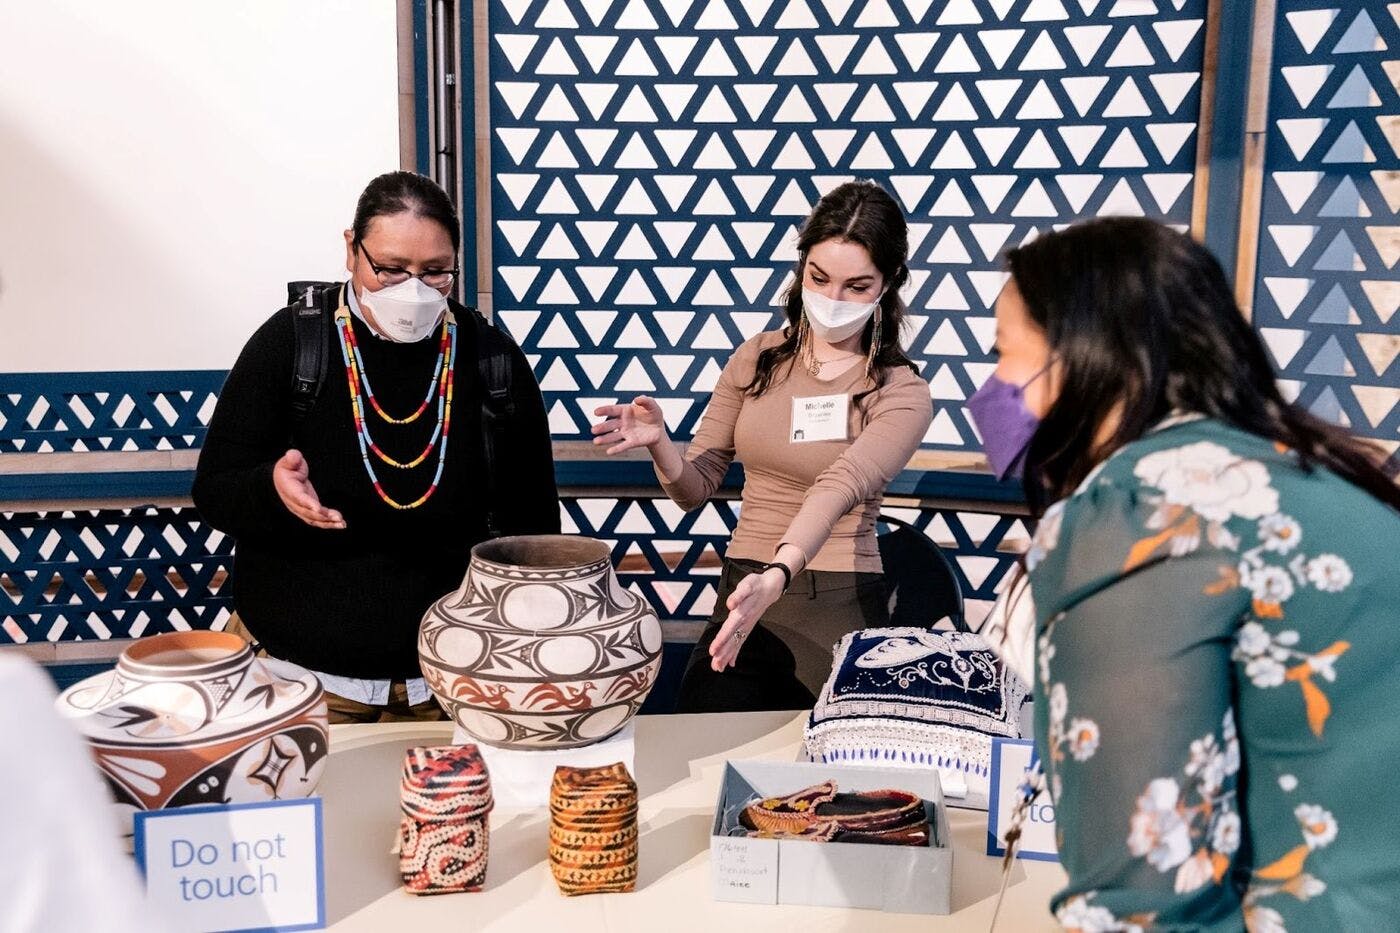 Three people stand around a table motioning to each other over a table with cultural materials displayed, including pottery, baskets, and beaded items.